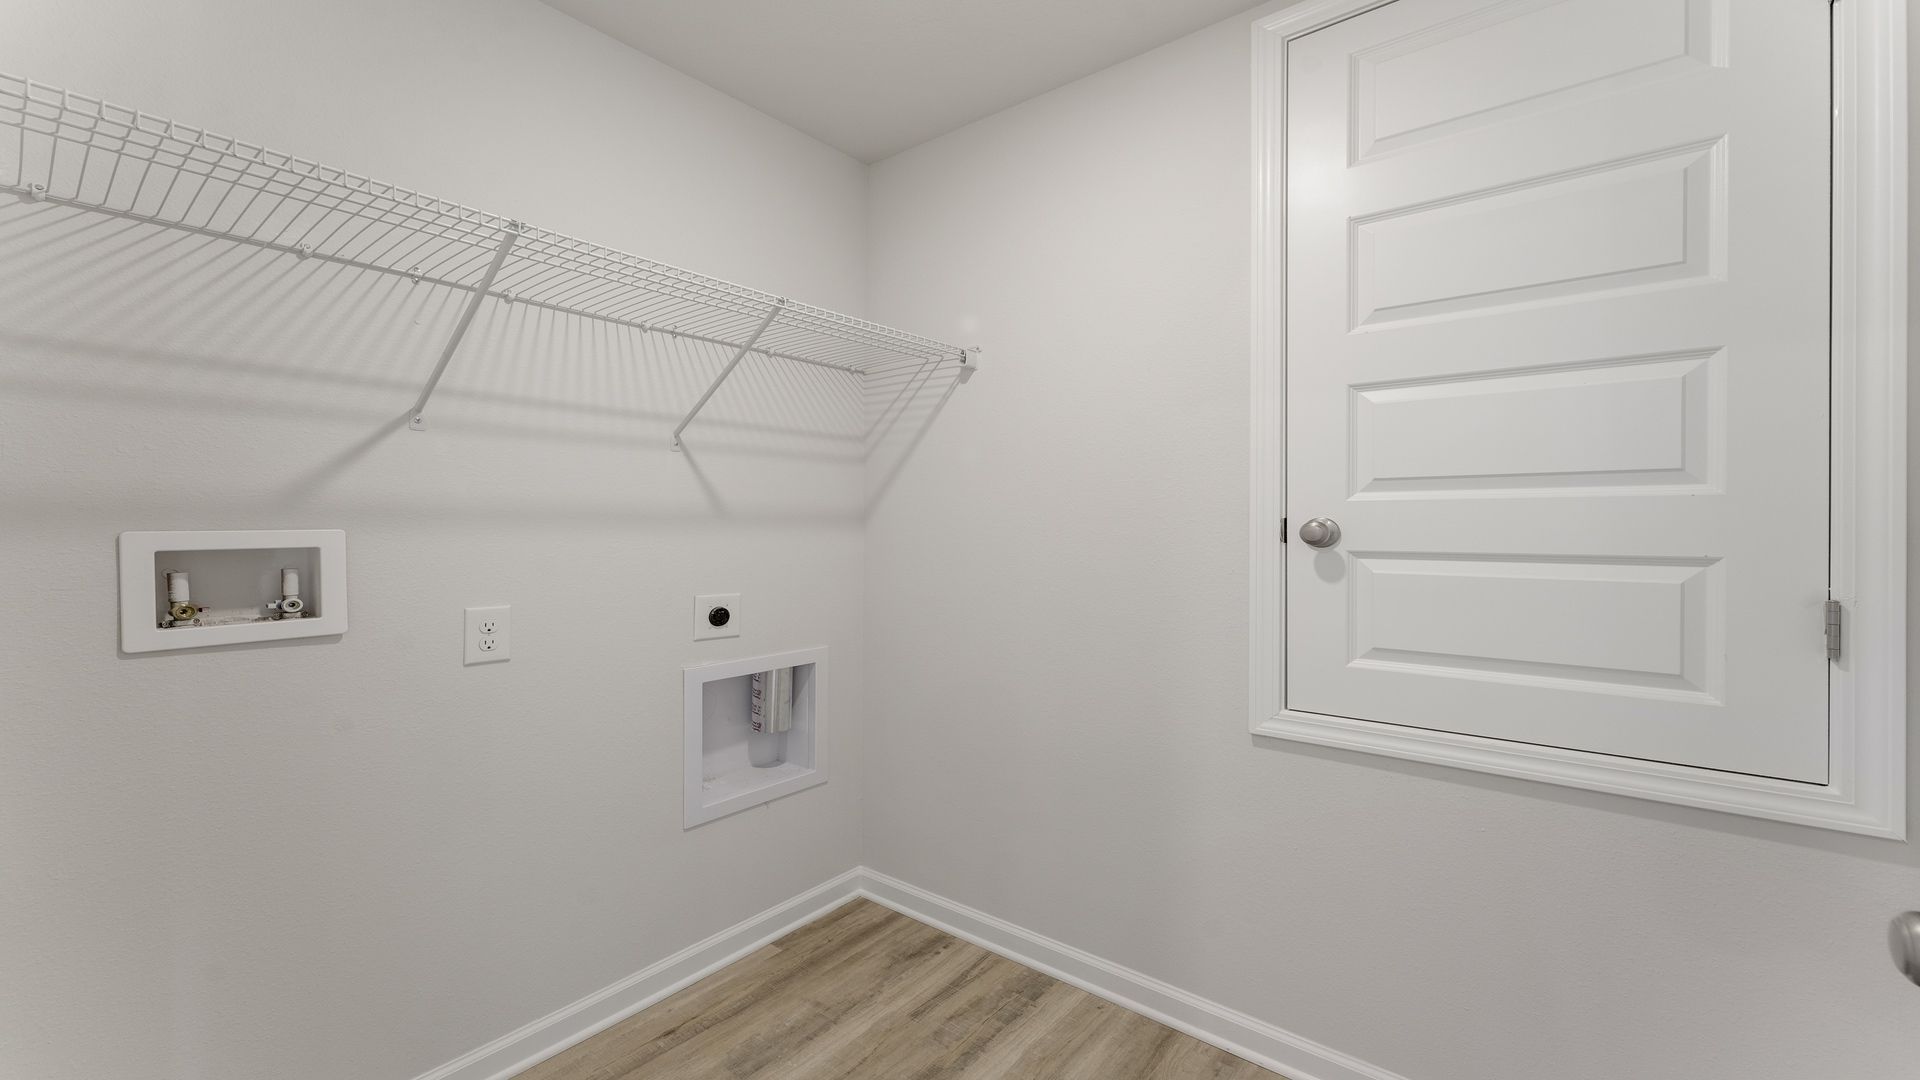 Laundry room with ventilated shelving.